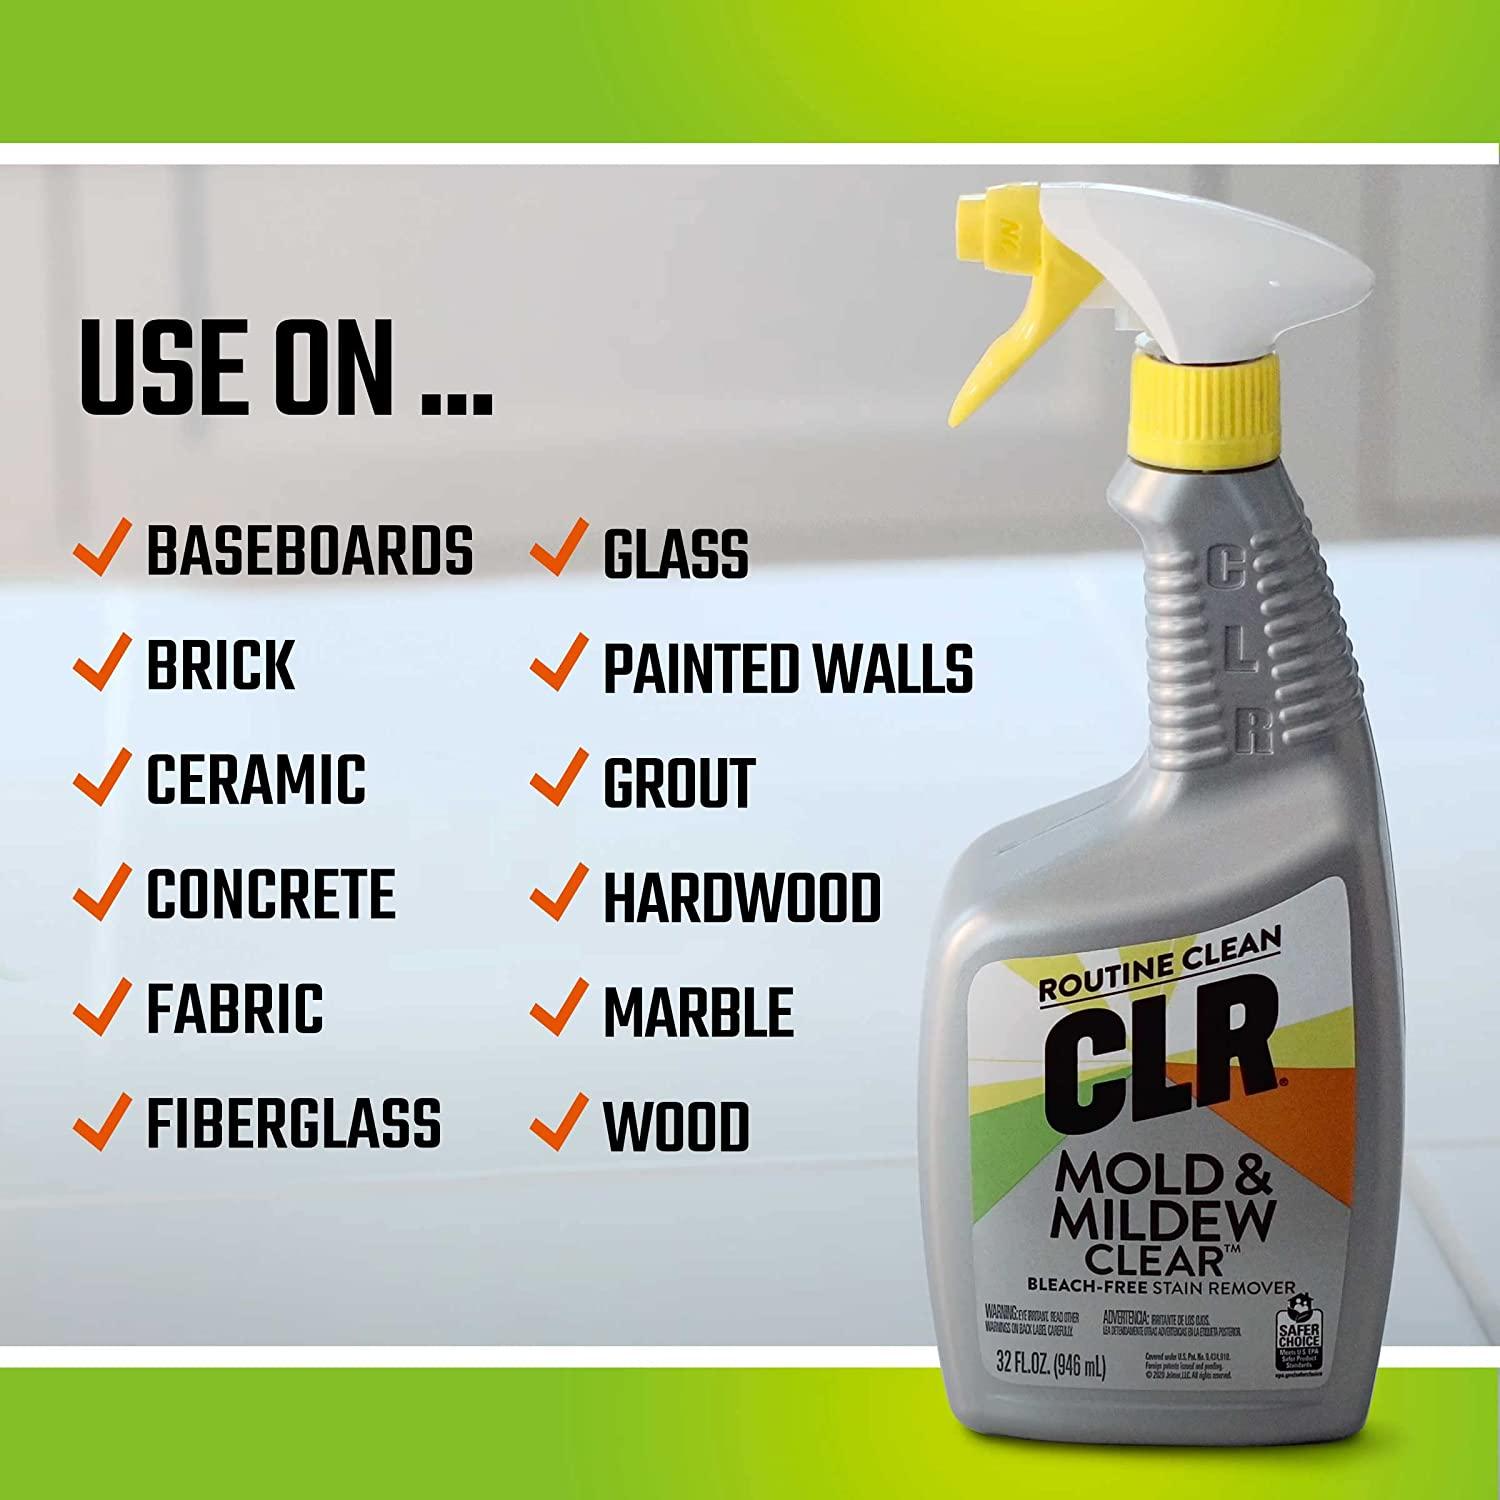 CLR Mold & Mildew Clear, Bleach-Free Stain Remover Spray